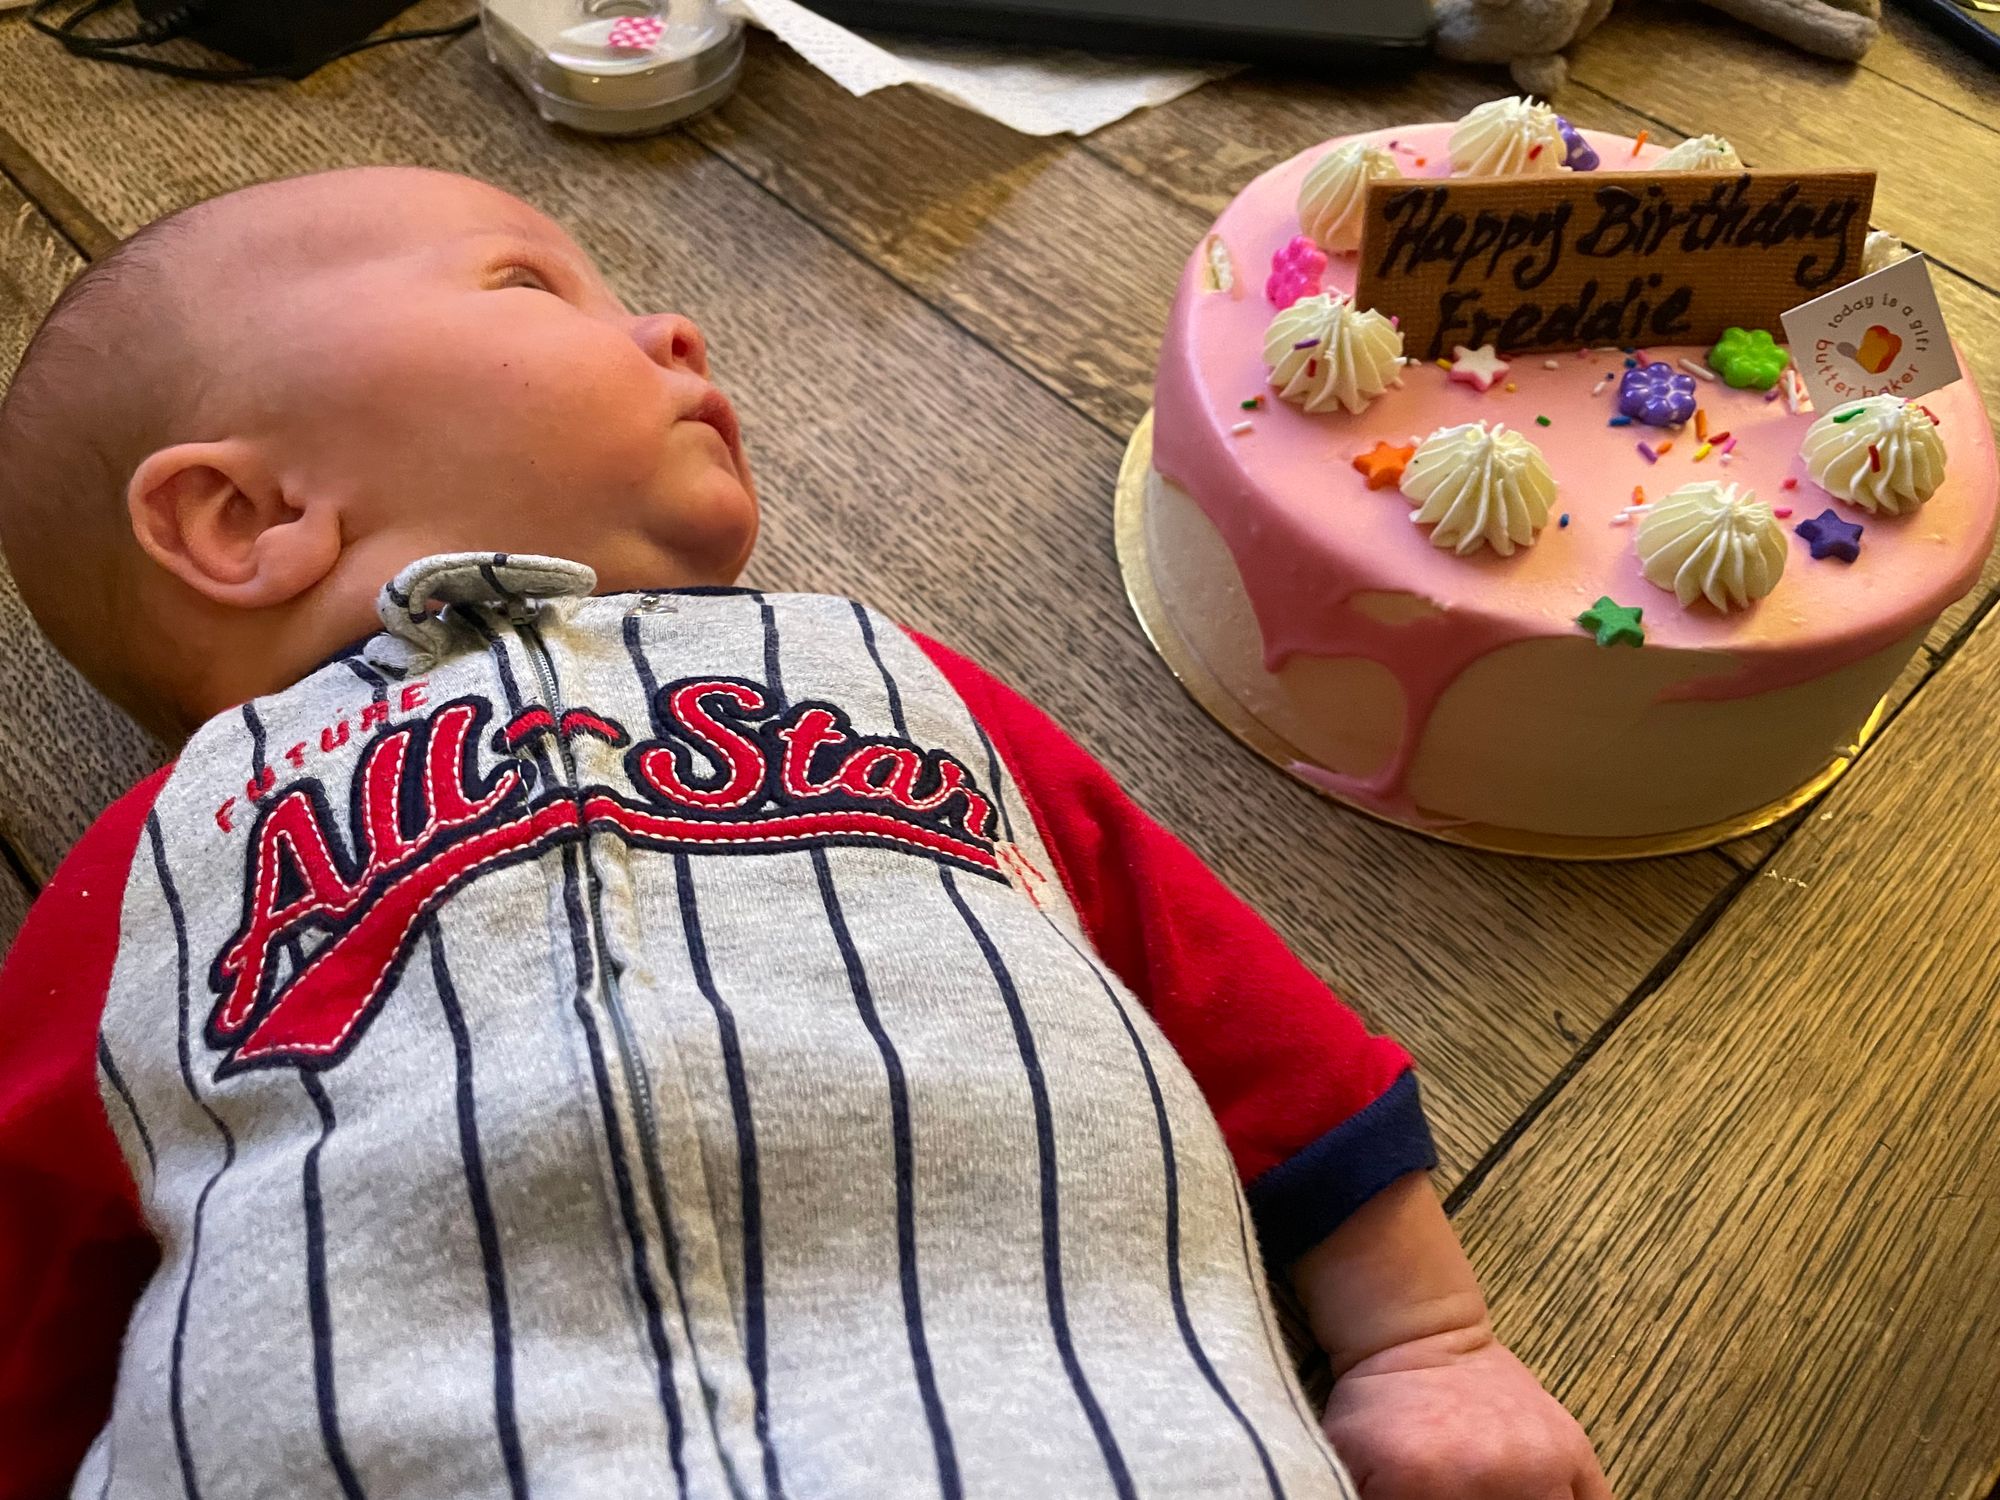 Freddie in a "Future All-Star" onesie, looking at a cake.